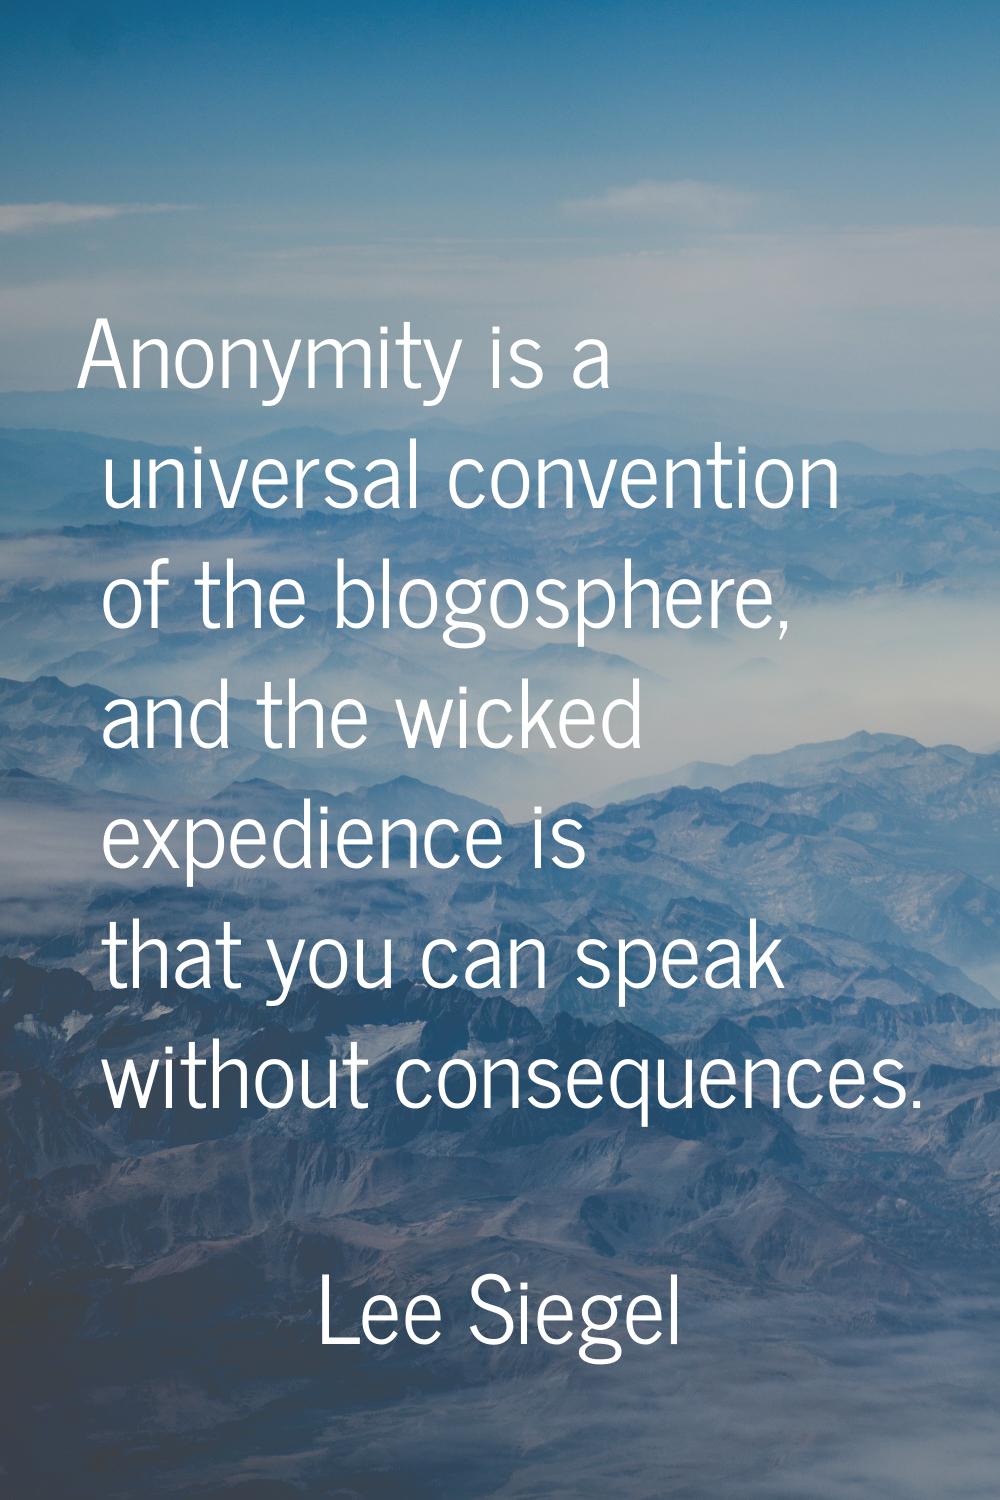 Anonymity is a universal convention of the blogosphere, and the wicked expedience is that you can s